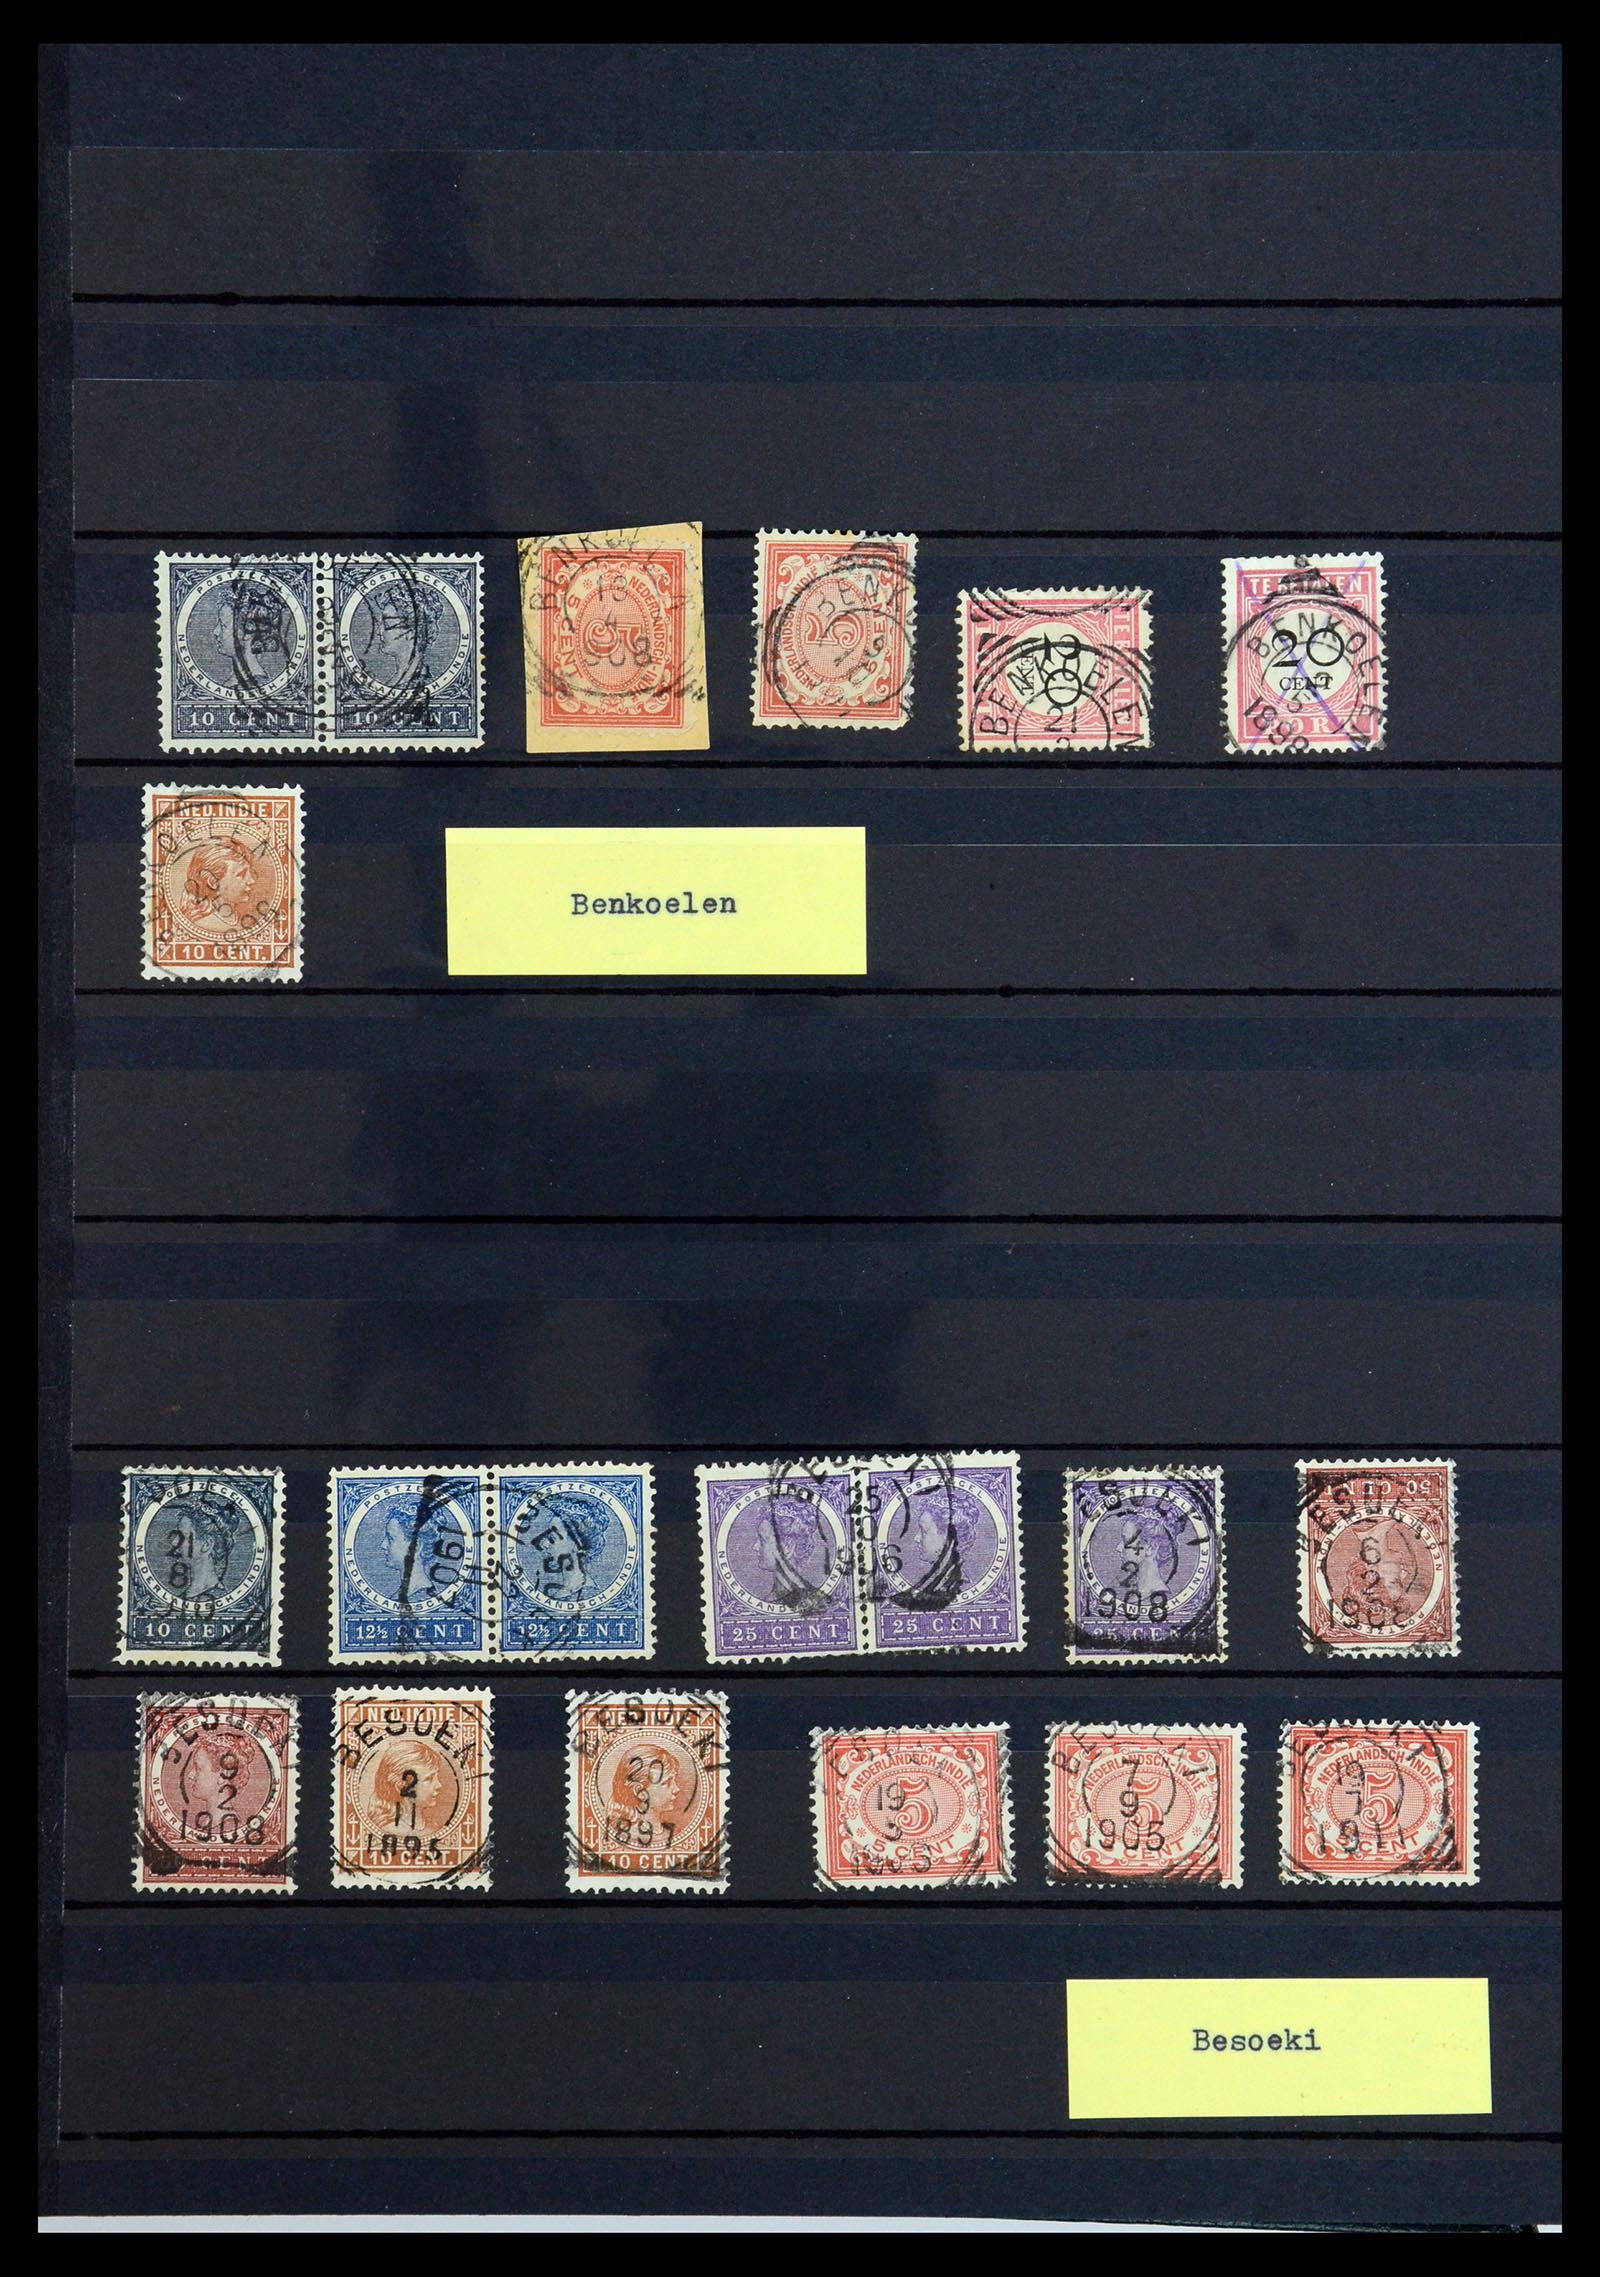 36371 008 - Stamp collection 36371 Dutch east Indies cancels.